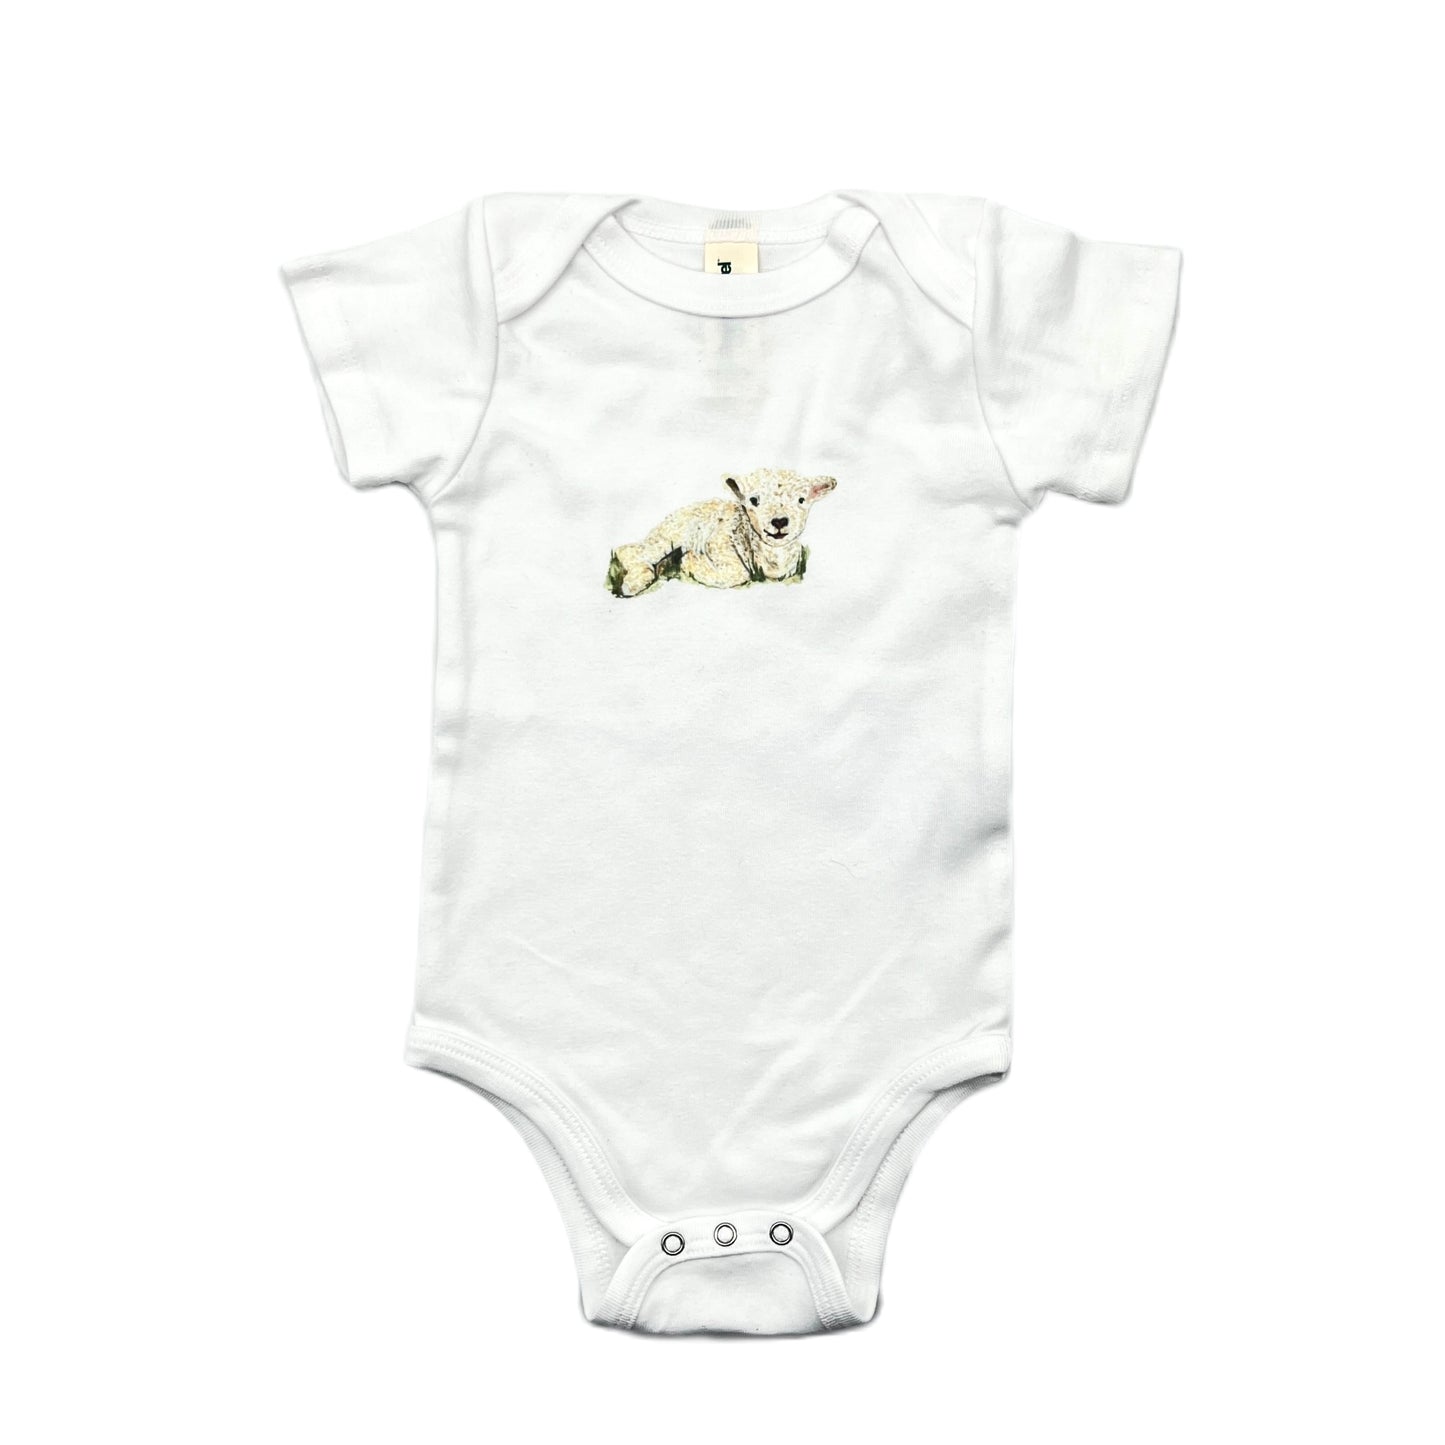 Organic Cotton Infant One Piece Littles Infant Clothing 1818 Farms   